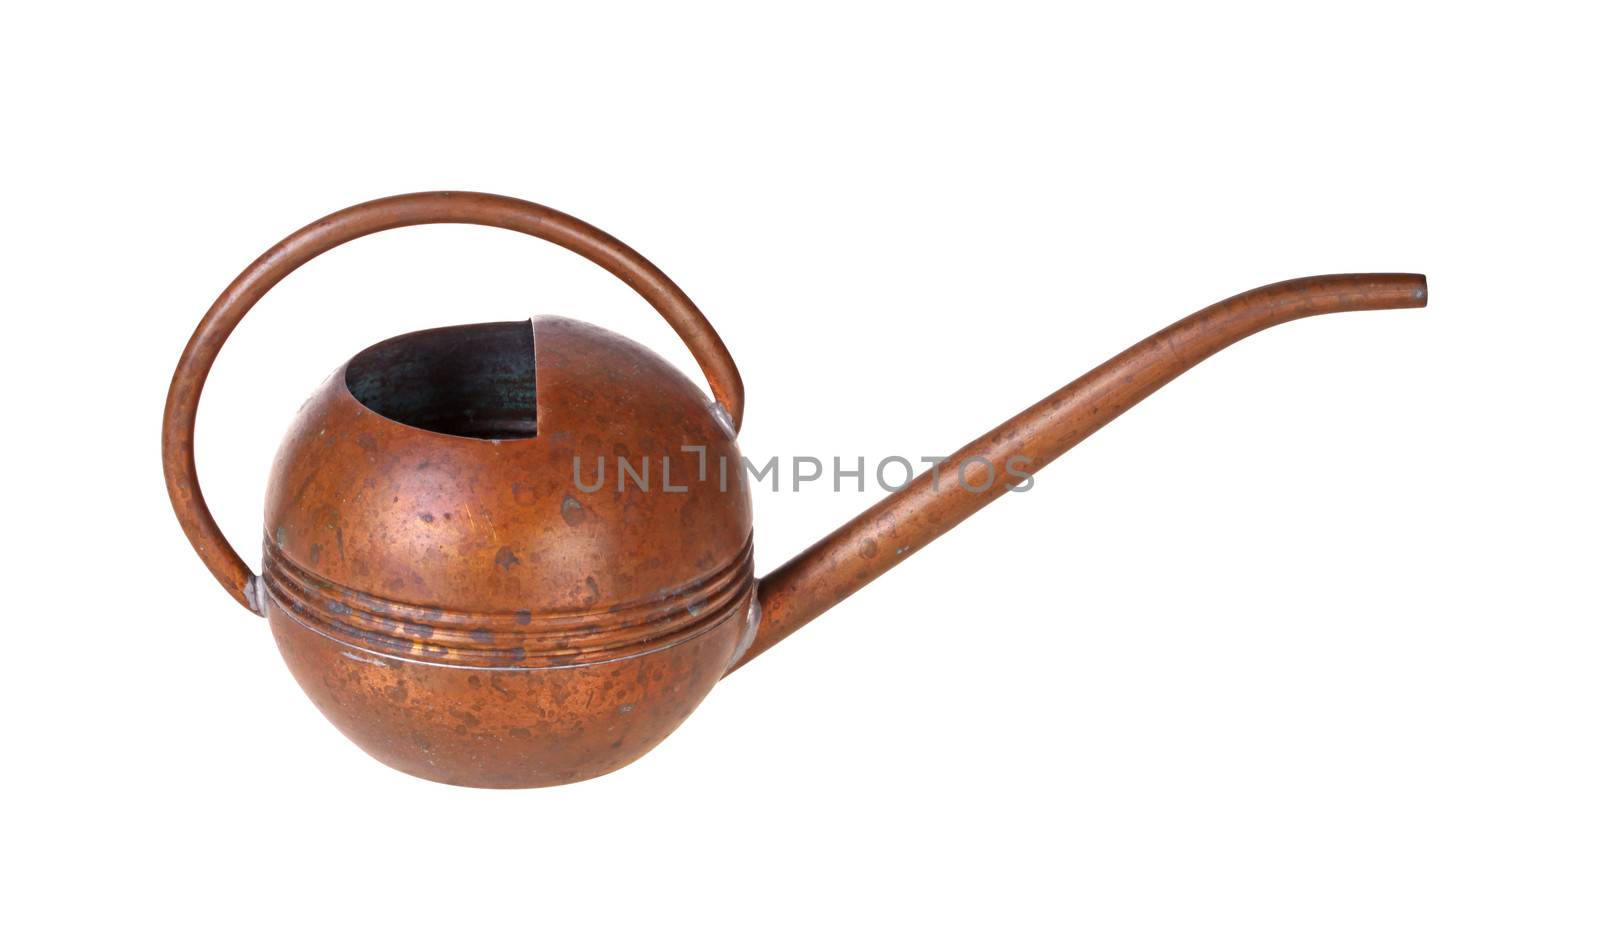 A small antique watering can made of copper metal isolated against a white background